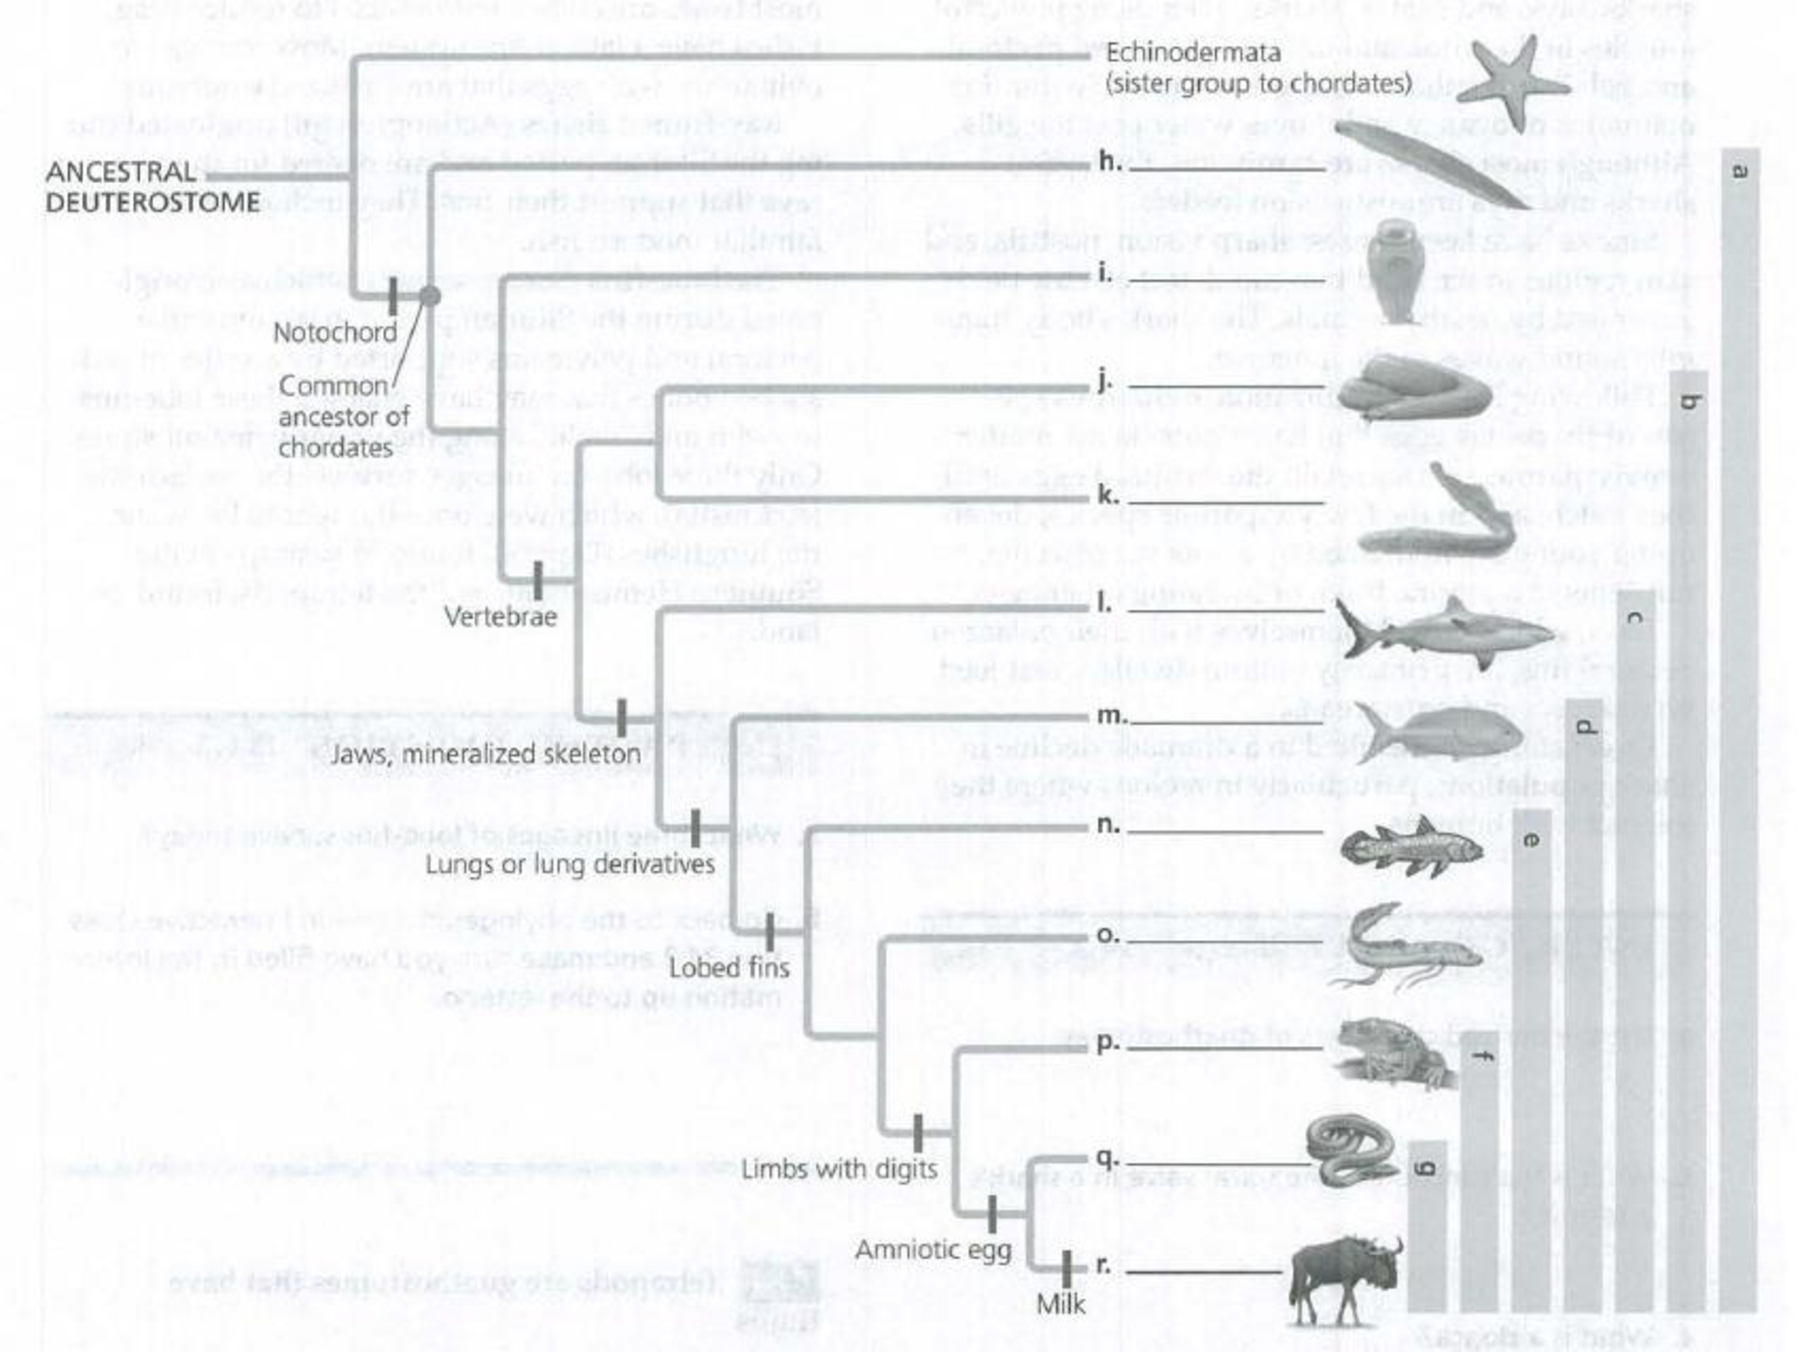 Chapter 34, Problem 3IQ, The following phylogenetic hypothesis shows the major clades of chordates with some of the derived 